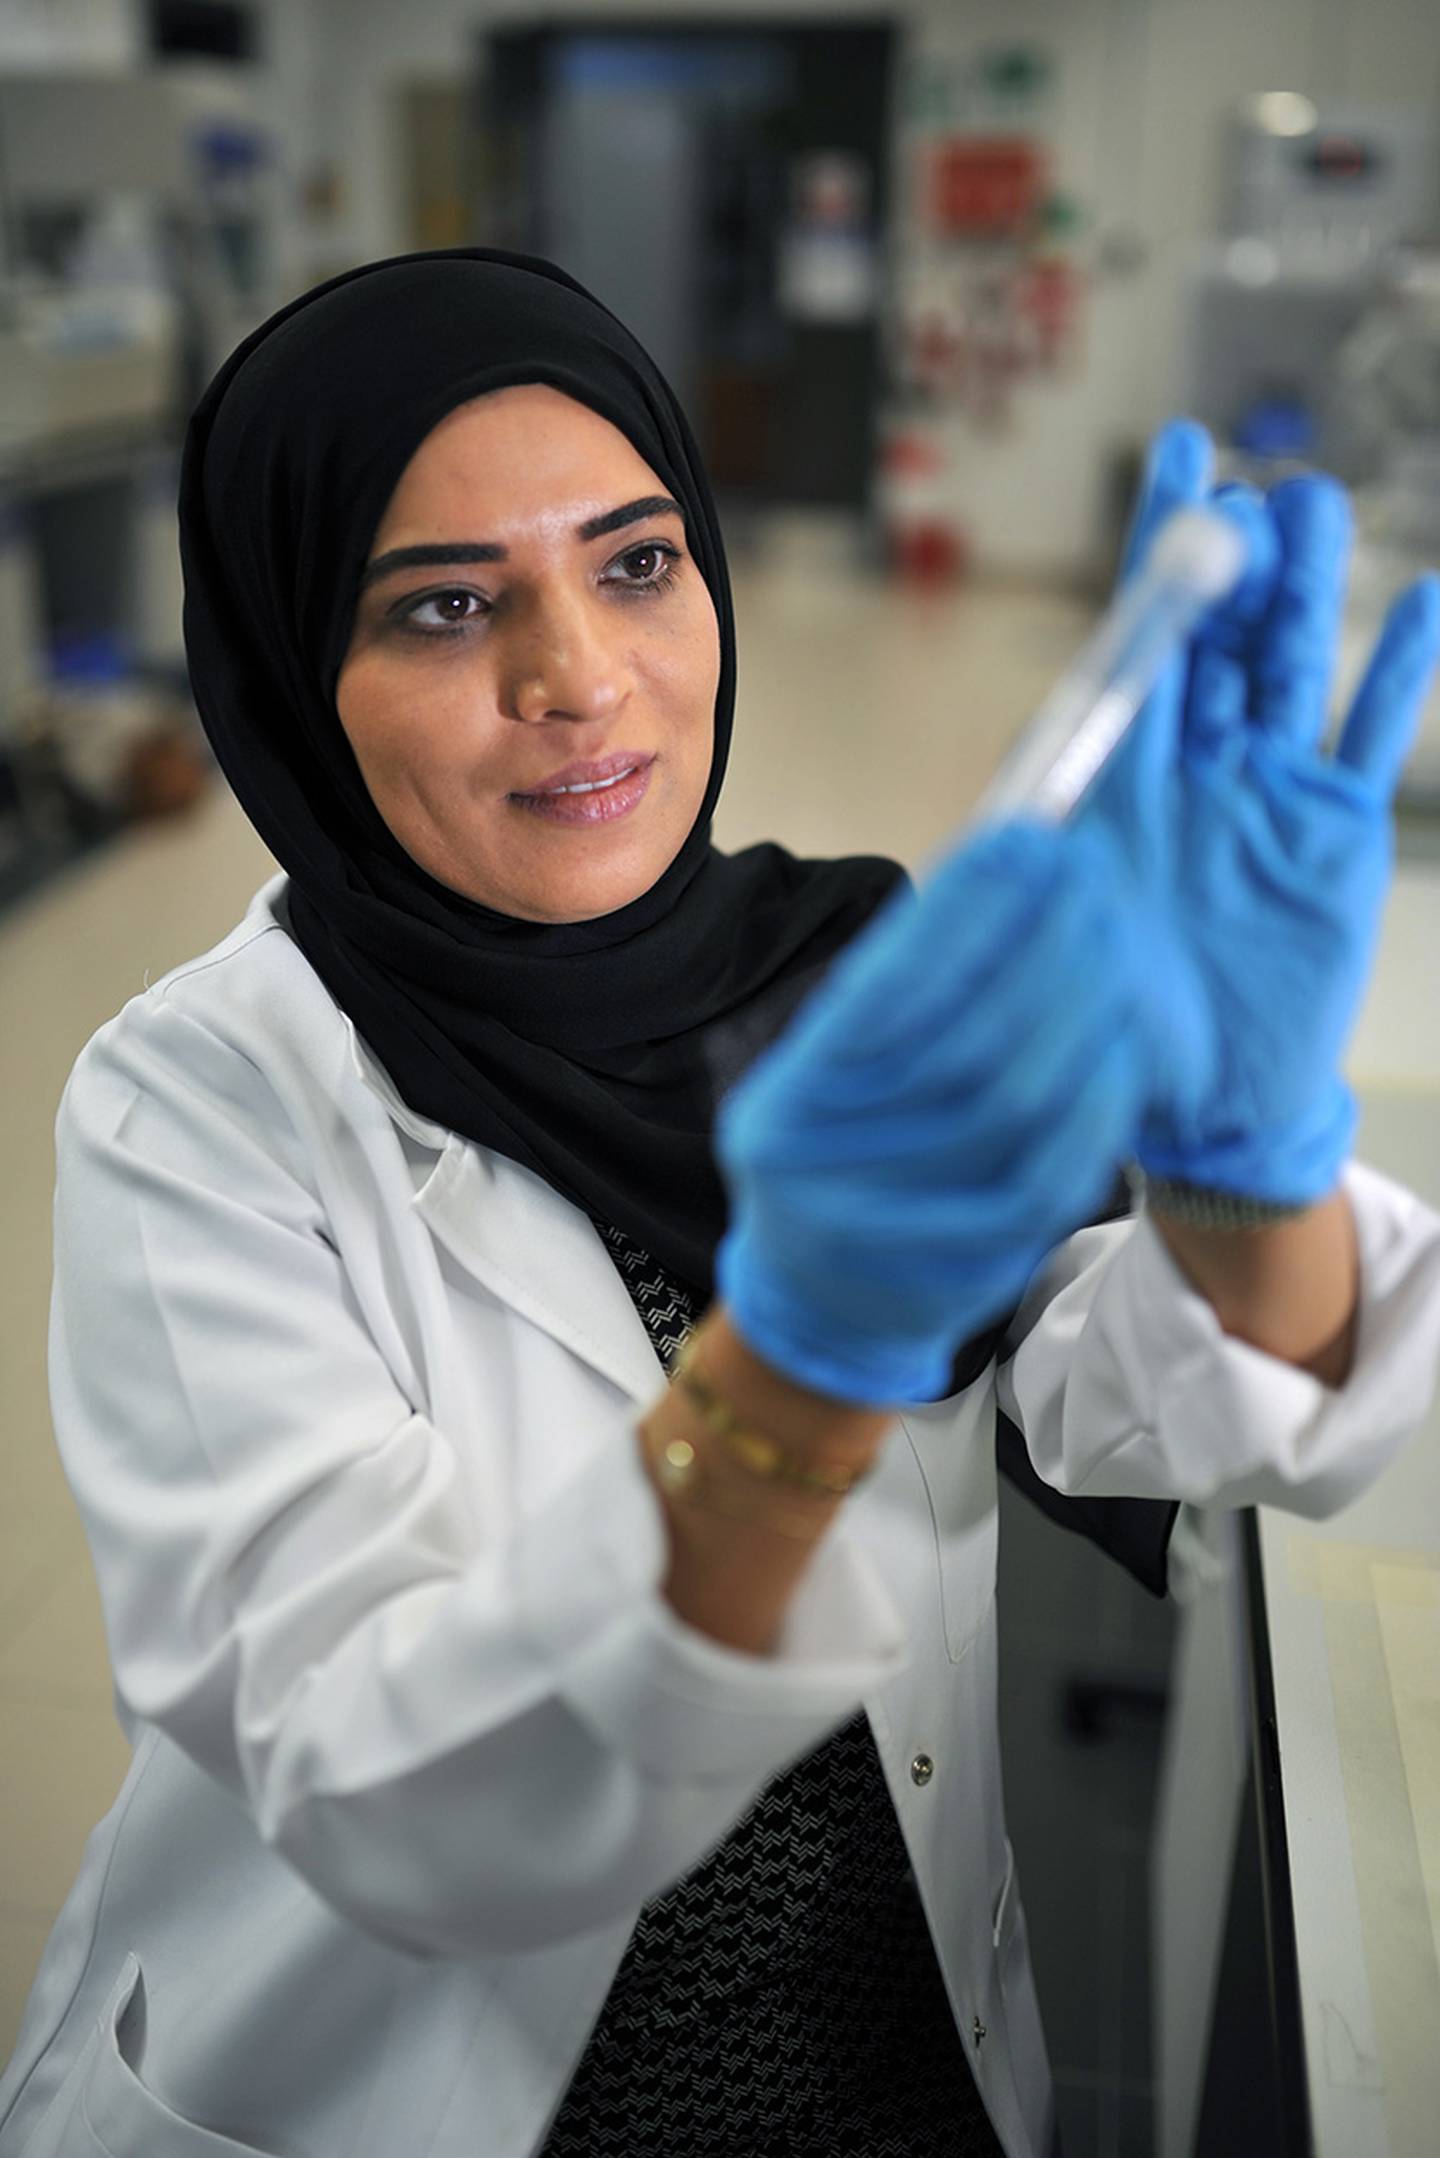 ABU DHABI, UNITED ARAB EMIRATES - - -  May 15, 2016 --- Dr. Habiba Al Safar, Director of Biotechnology Center and Assistant Professor at Khalifa University, is working in collaboration with another researcher to discover the link between diabetes and vitamin D deficiency. She is photographed in the lab at Khalifa University on Sunday, May 15, 2016, in Abu Dhabi.    ( DELORES JOHNSON / The National )  ID: 66756Reporter:  Melanie SwanSection: NA